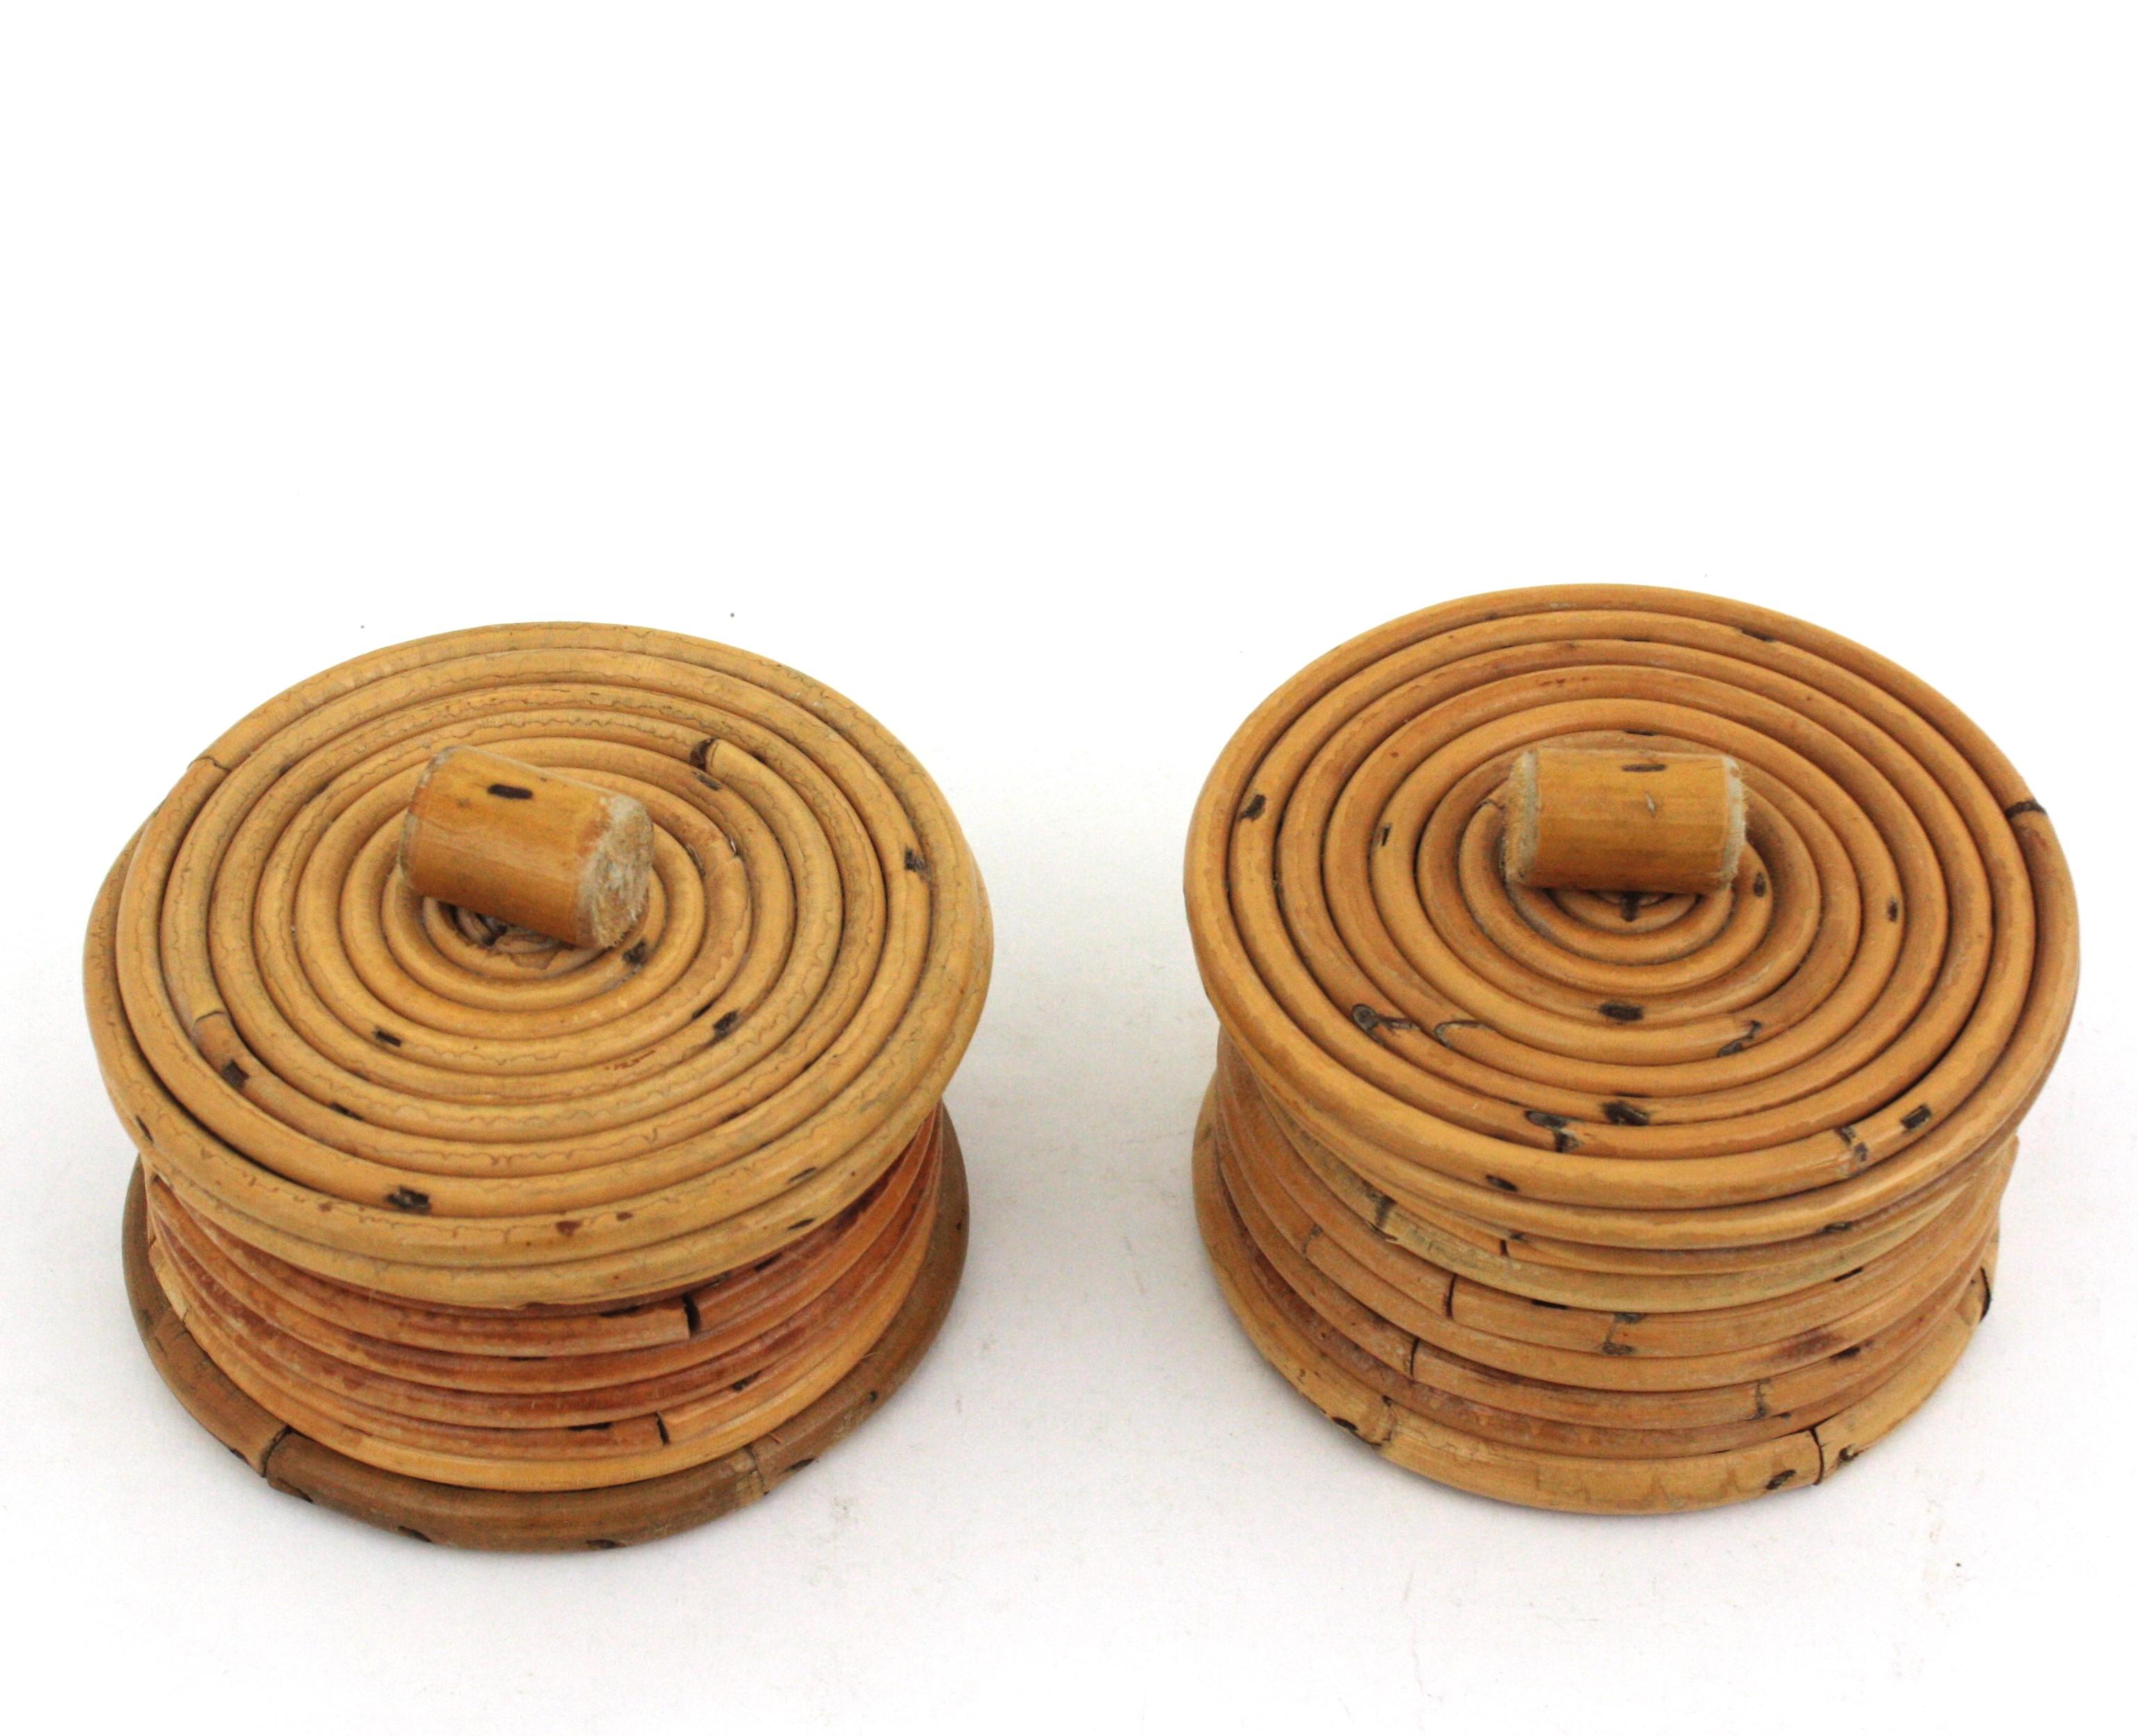 Hand-Crafted Pair of Rattan Round Lidded Boxes, 1960s For Sale